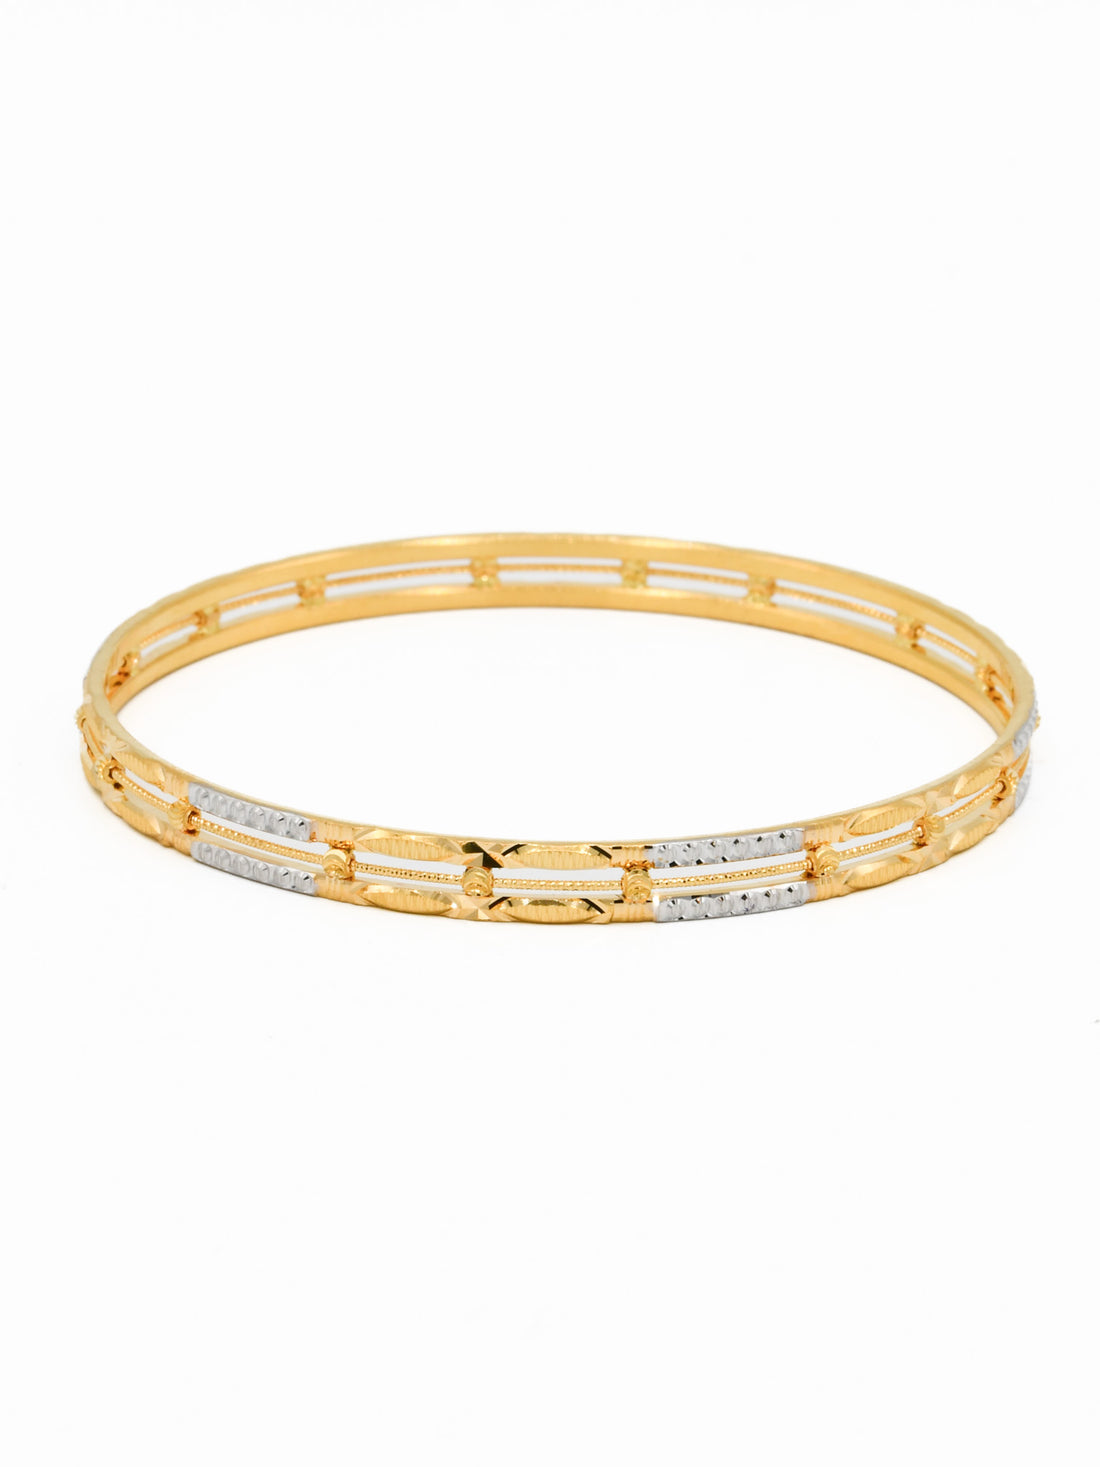 22ct Gold Two Tone Bangle - Roop Darshan